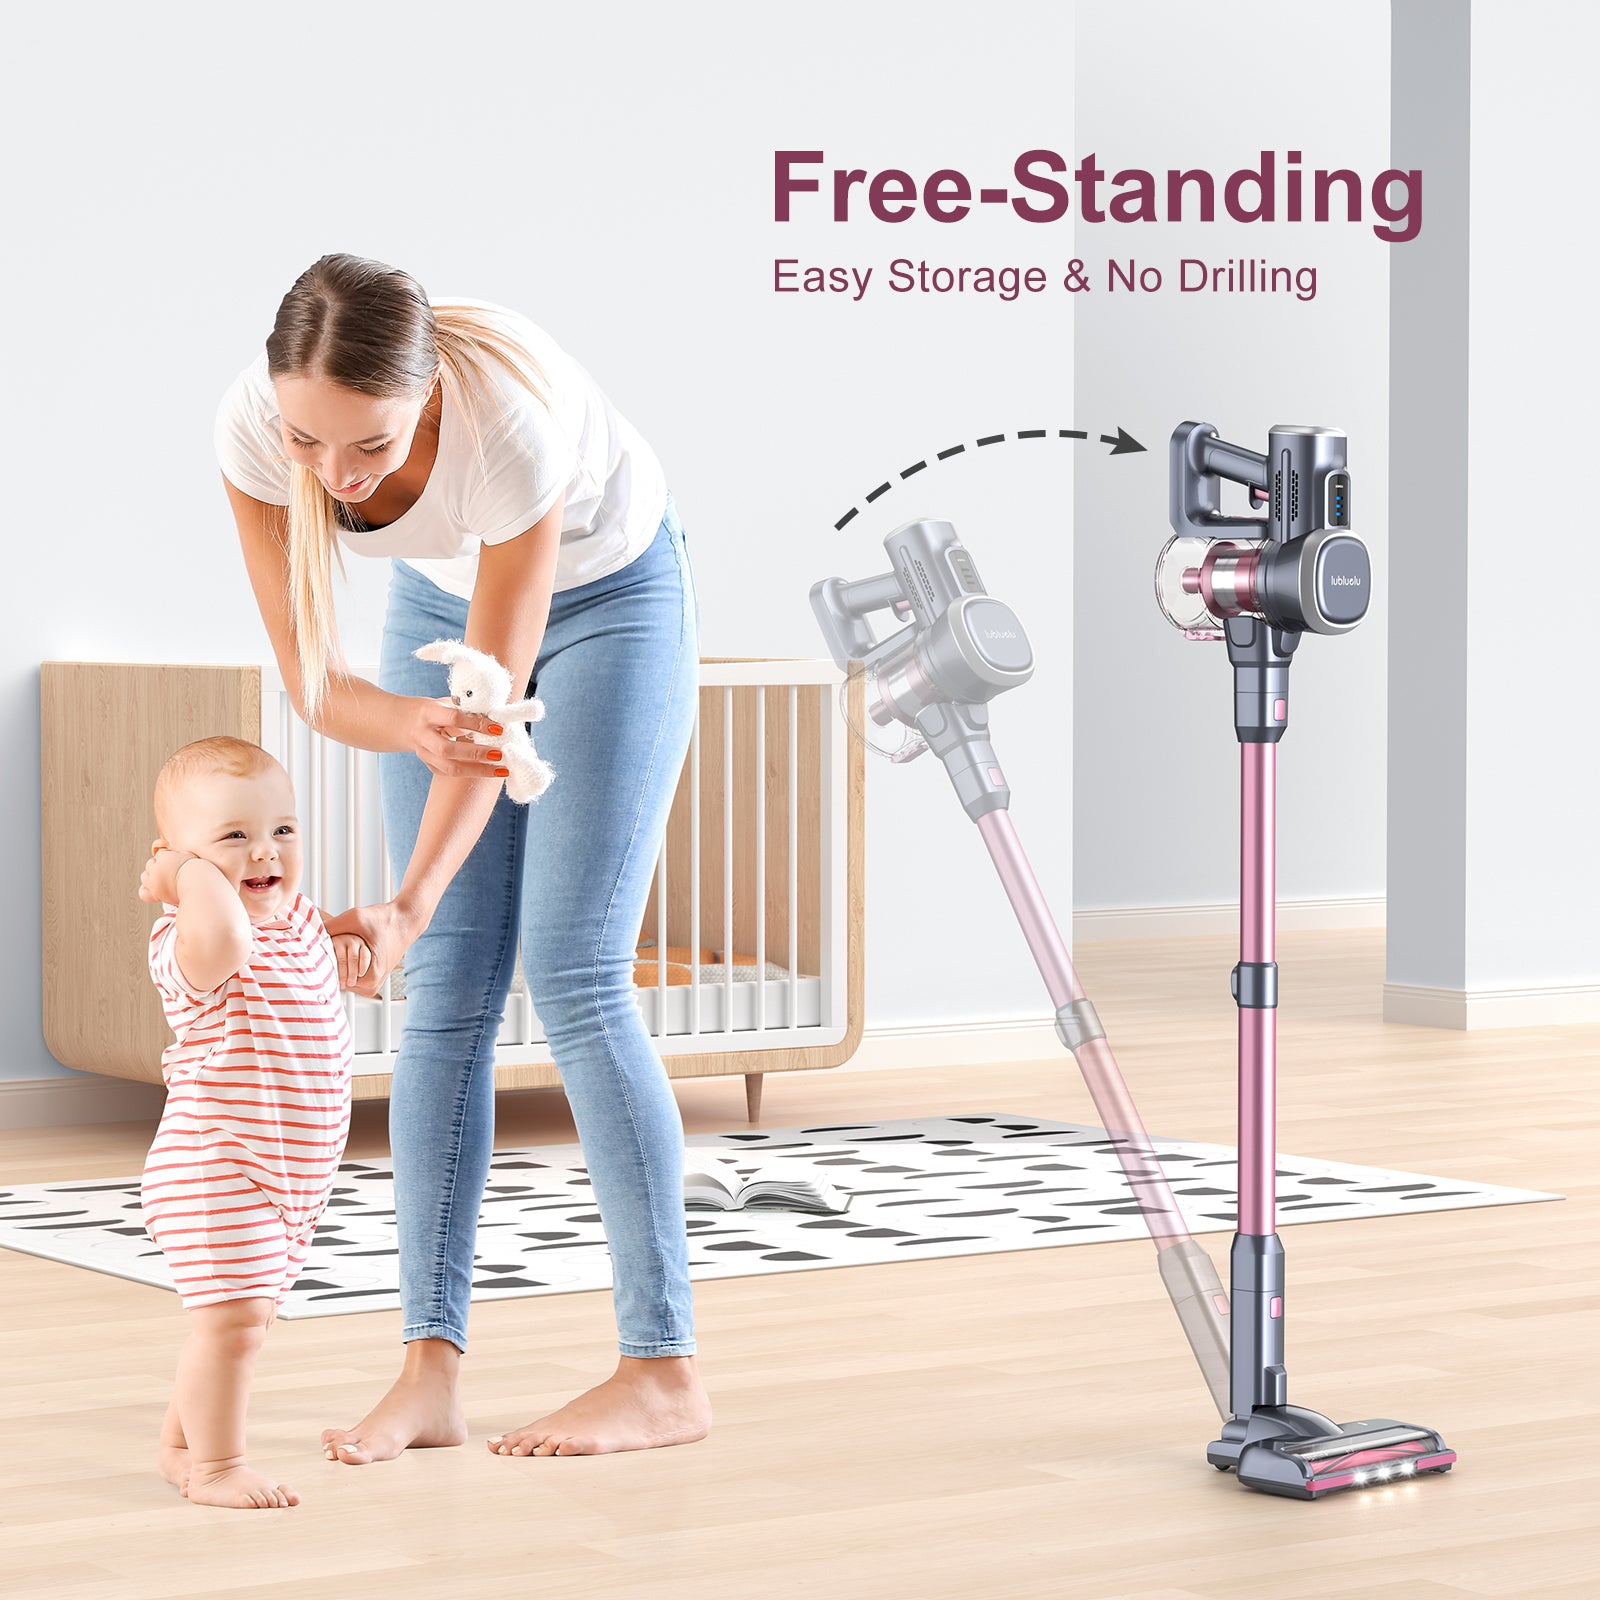 Unboxing Lubluelu 202 Self-Standing Cordless Vacuum Cleaner with